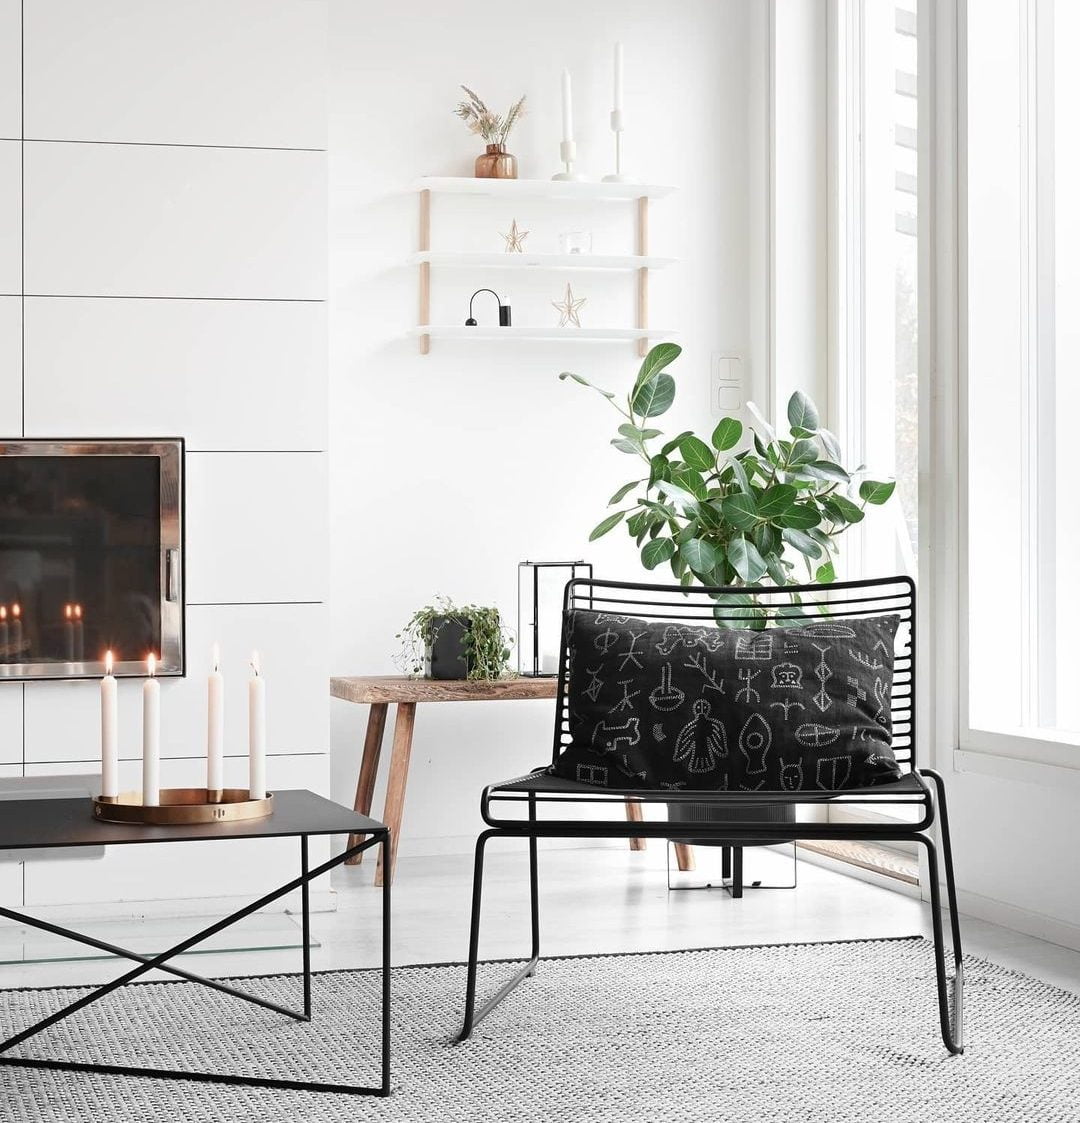 Nordic style interior with white and black furniture and wooden stars